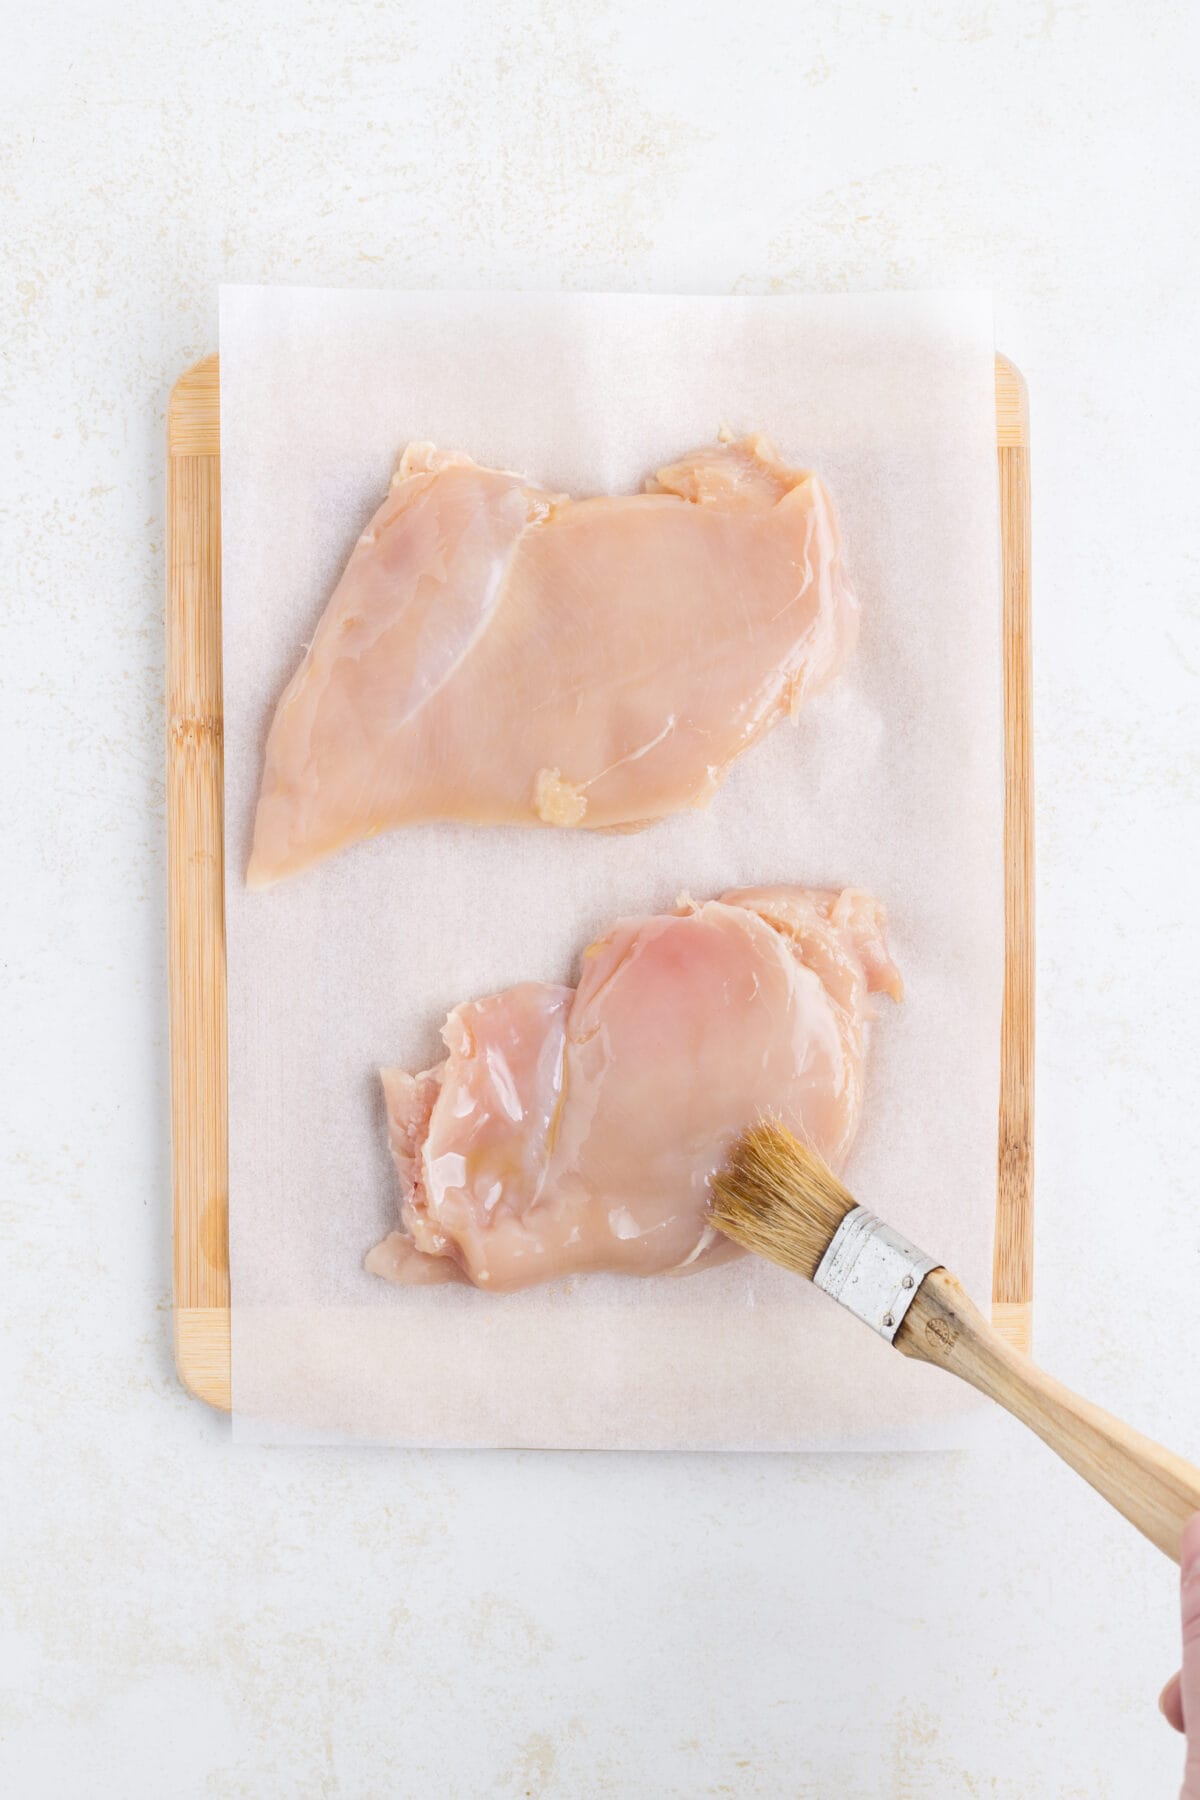 brushing the chicken breasts with olive oil.